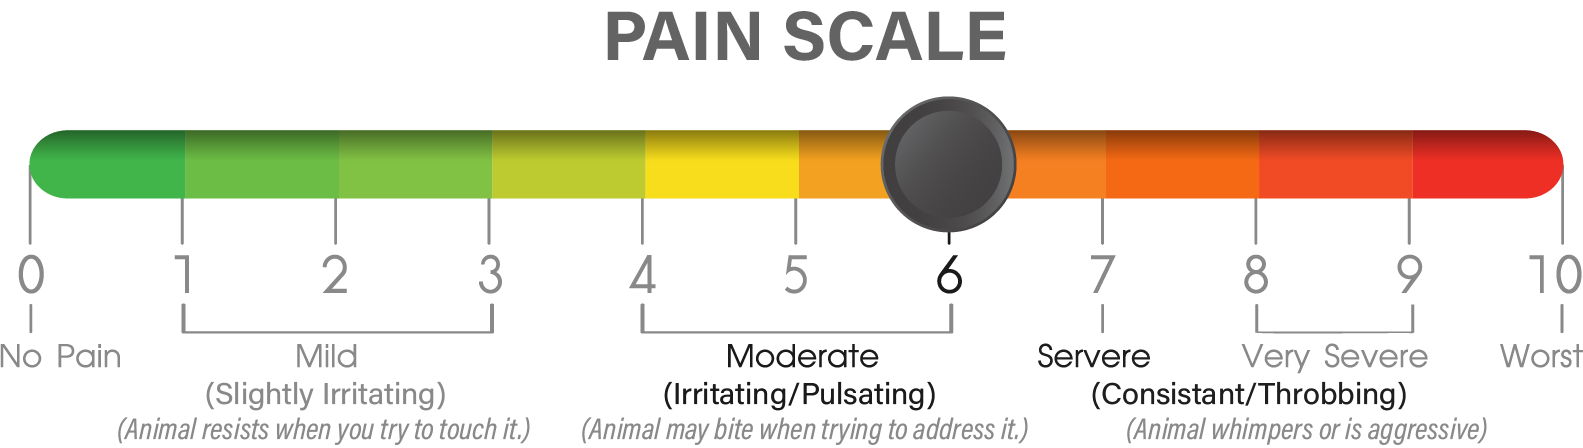 pain scale, labeled as moderate